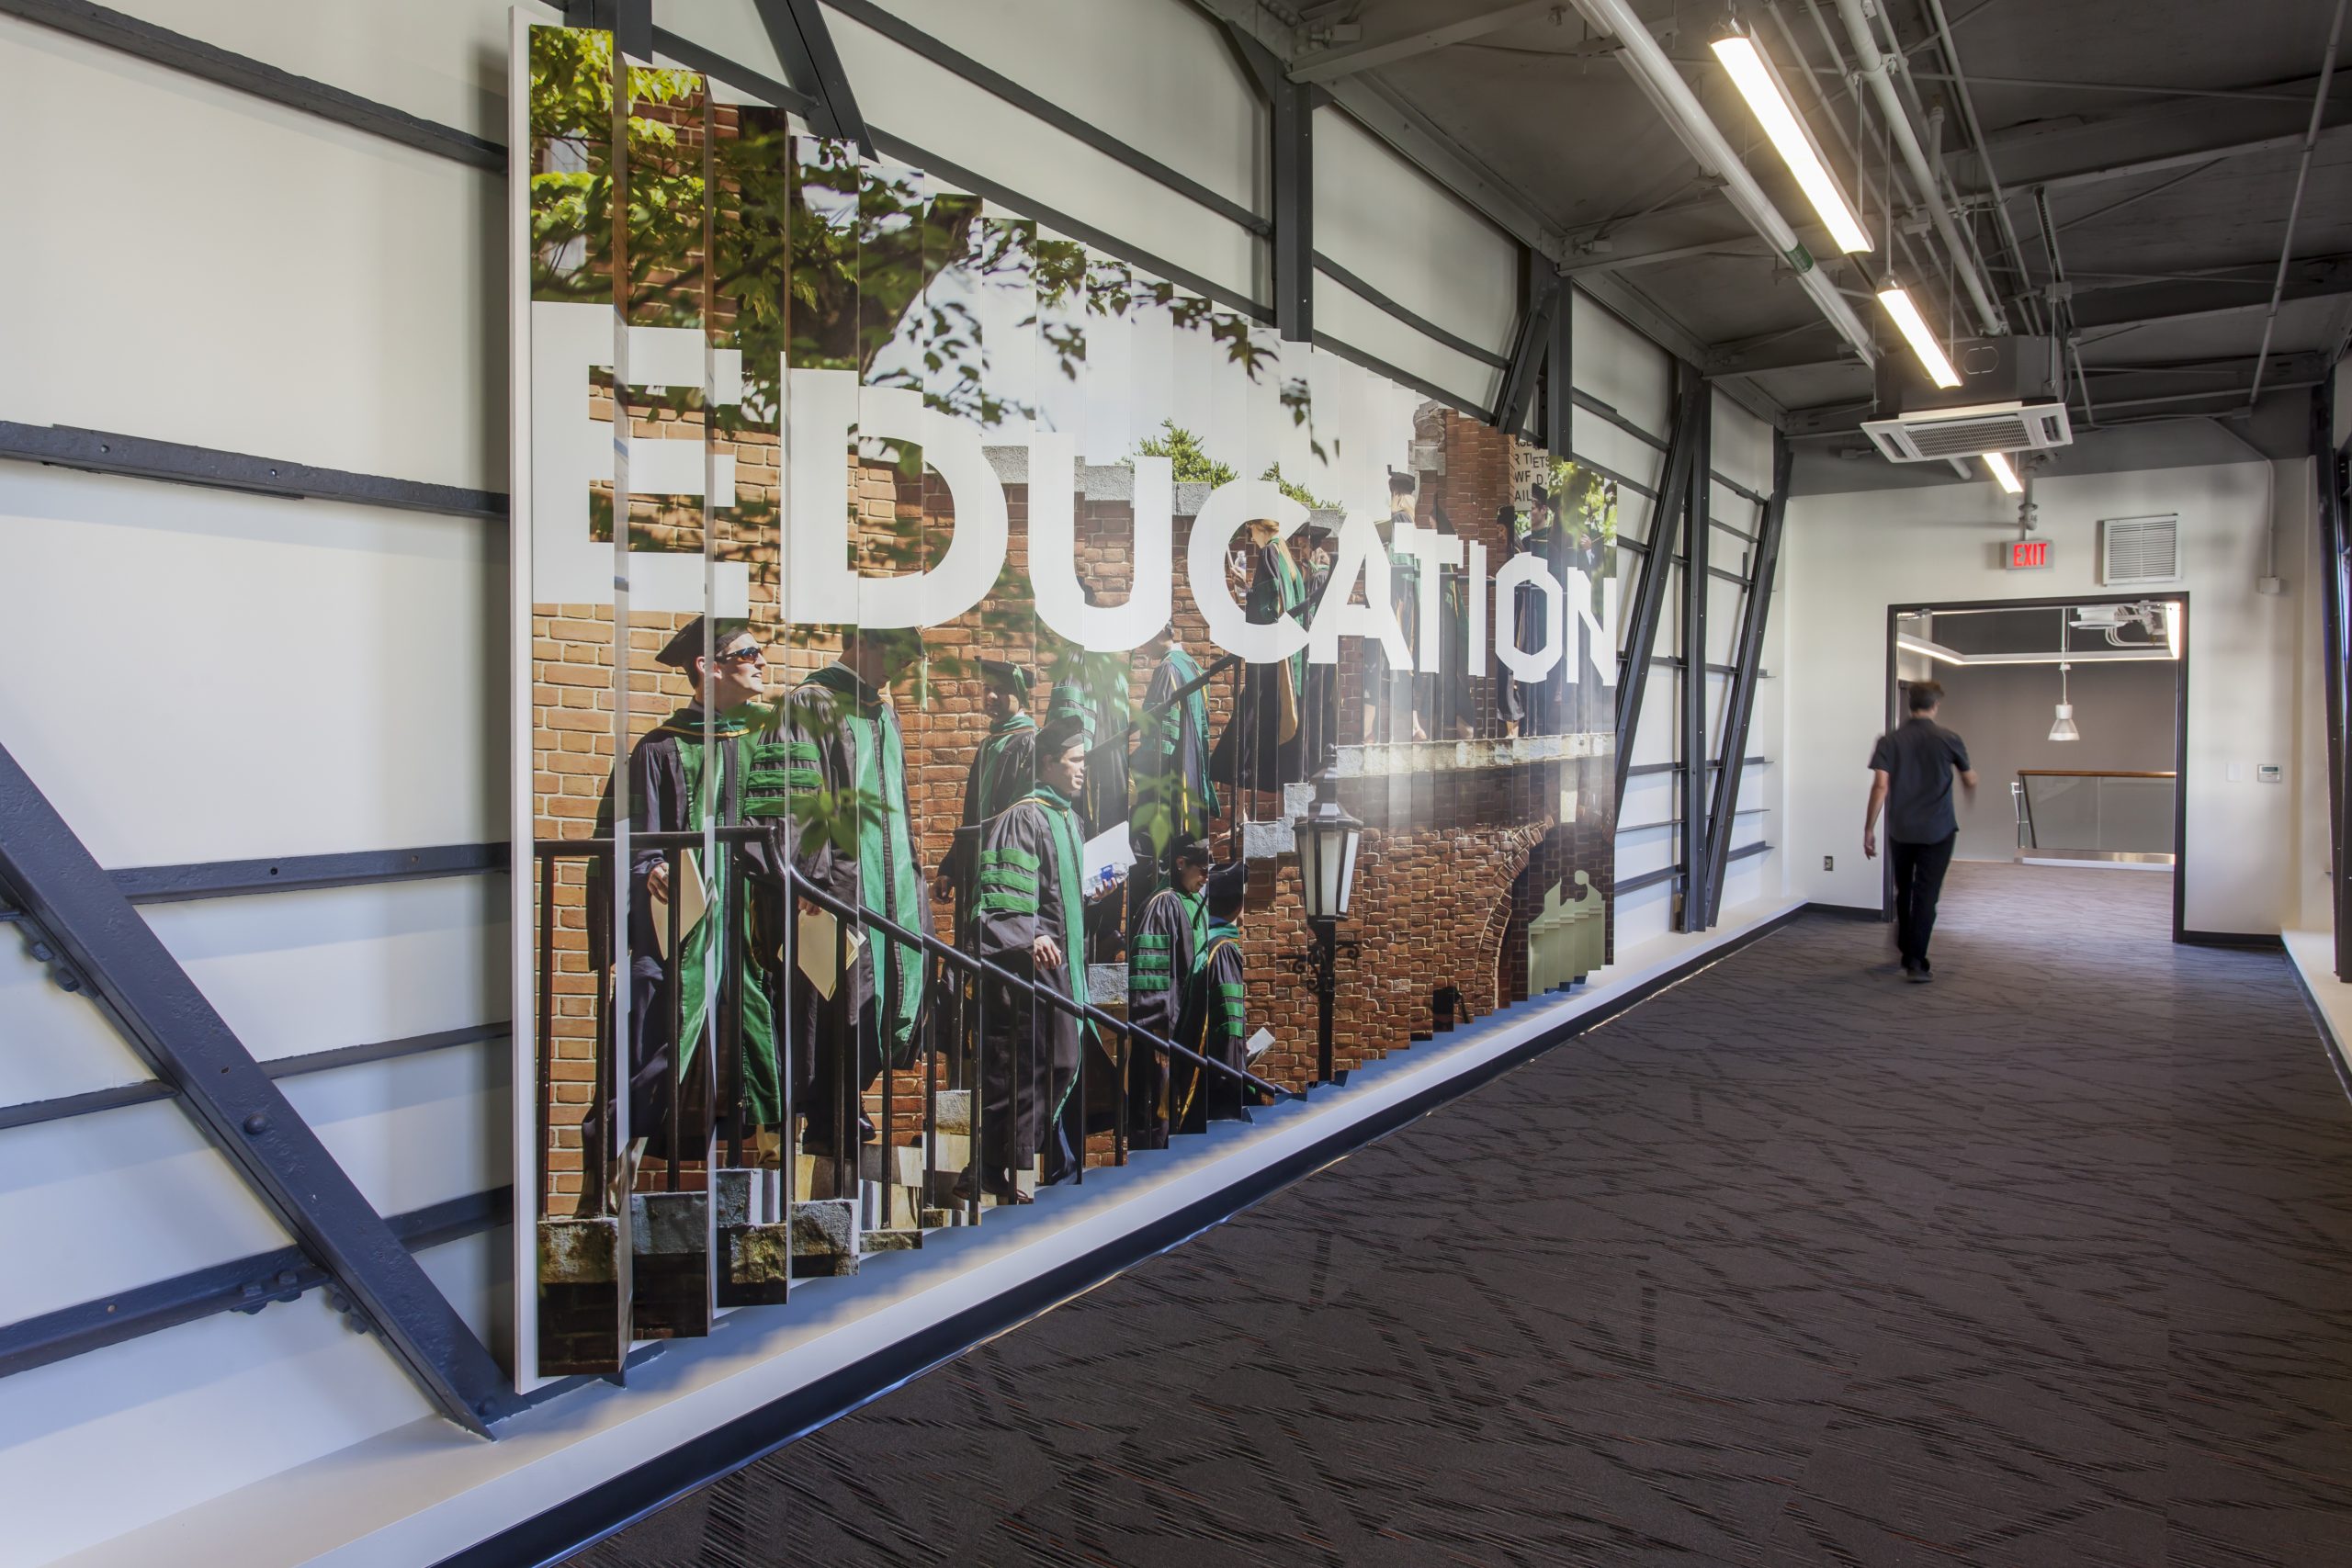 Wall with Graphic that says Education